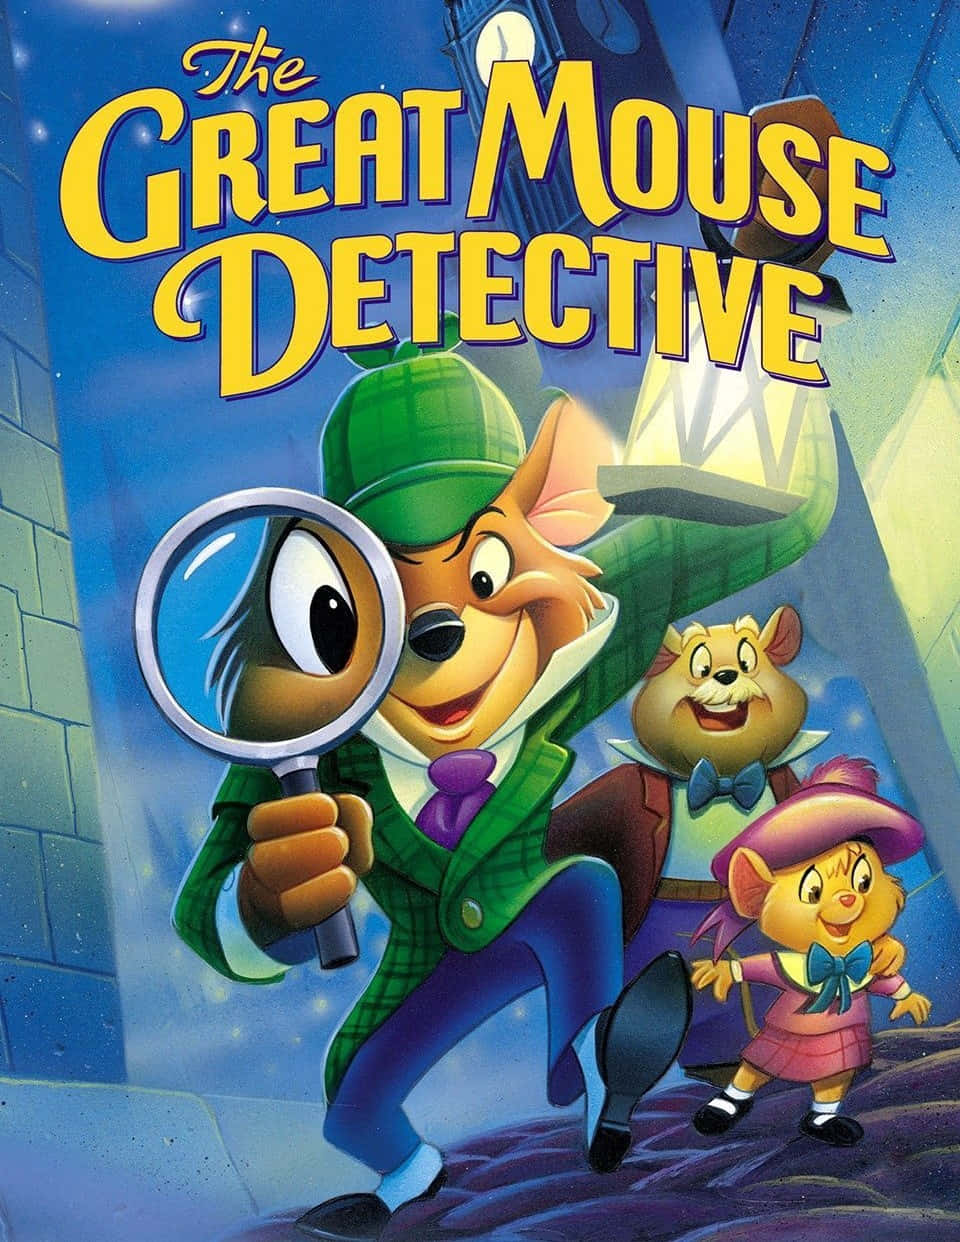 The Great Mouse Detective - Basil and Dr. Dawson with Olivia solving a mystery in London Wallpaper